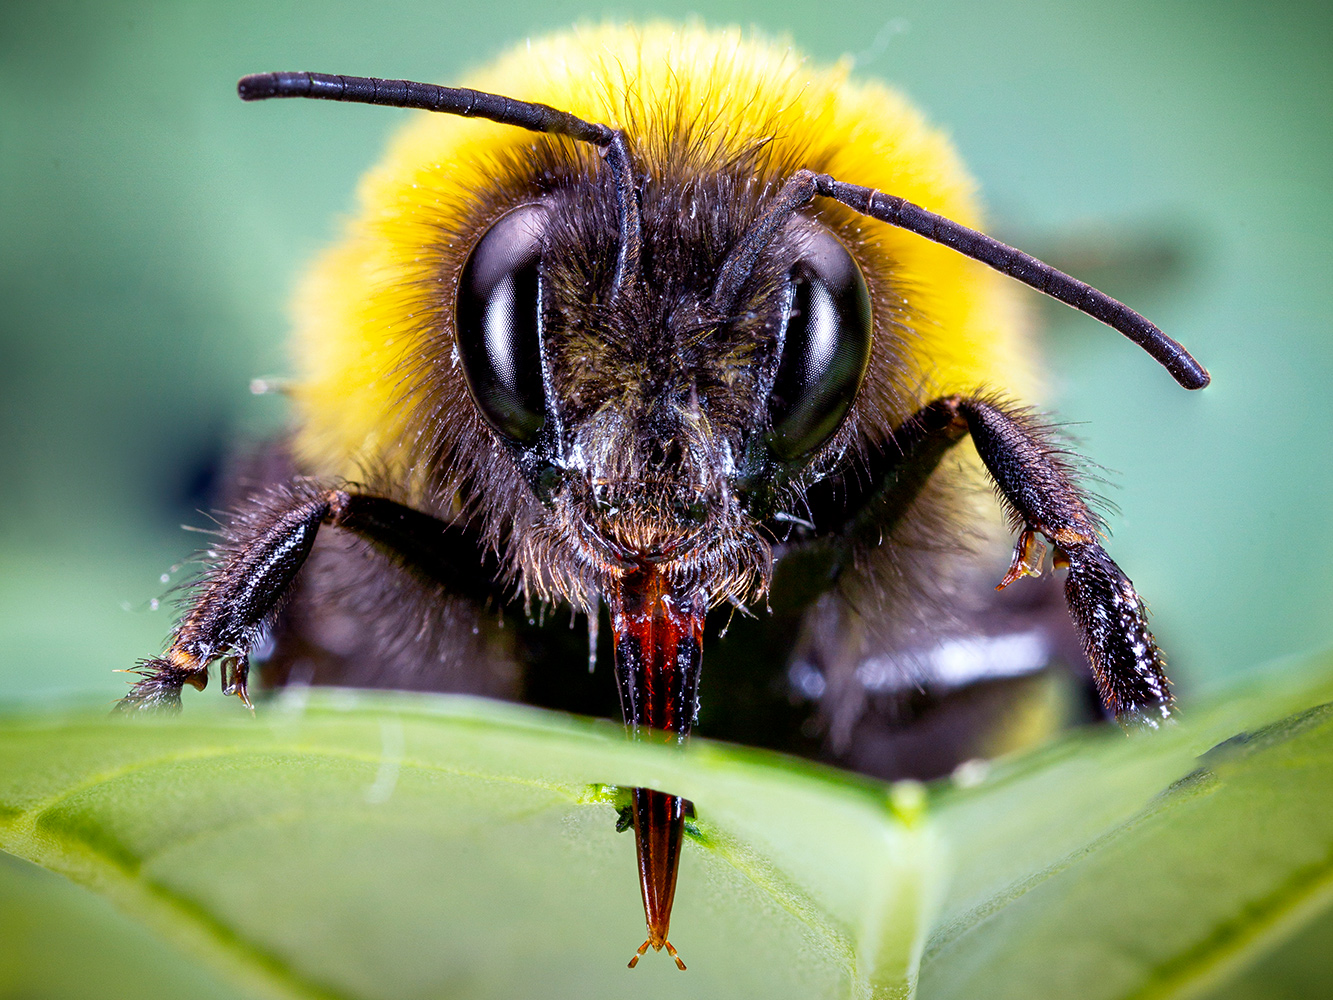 Close up image of a bumble bee on a leaf